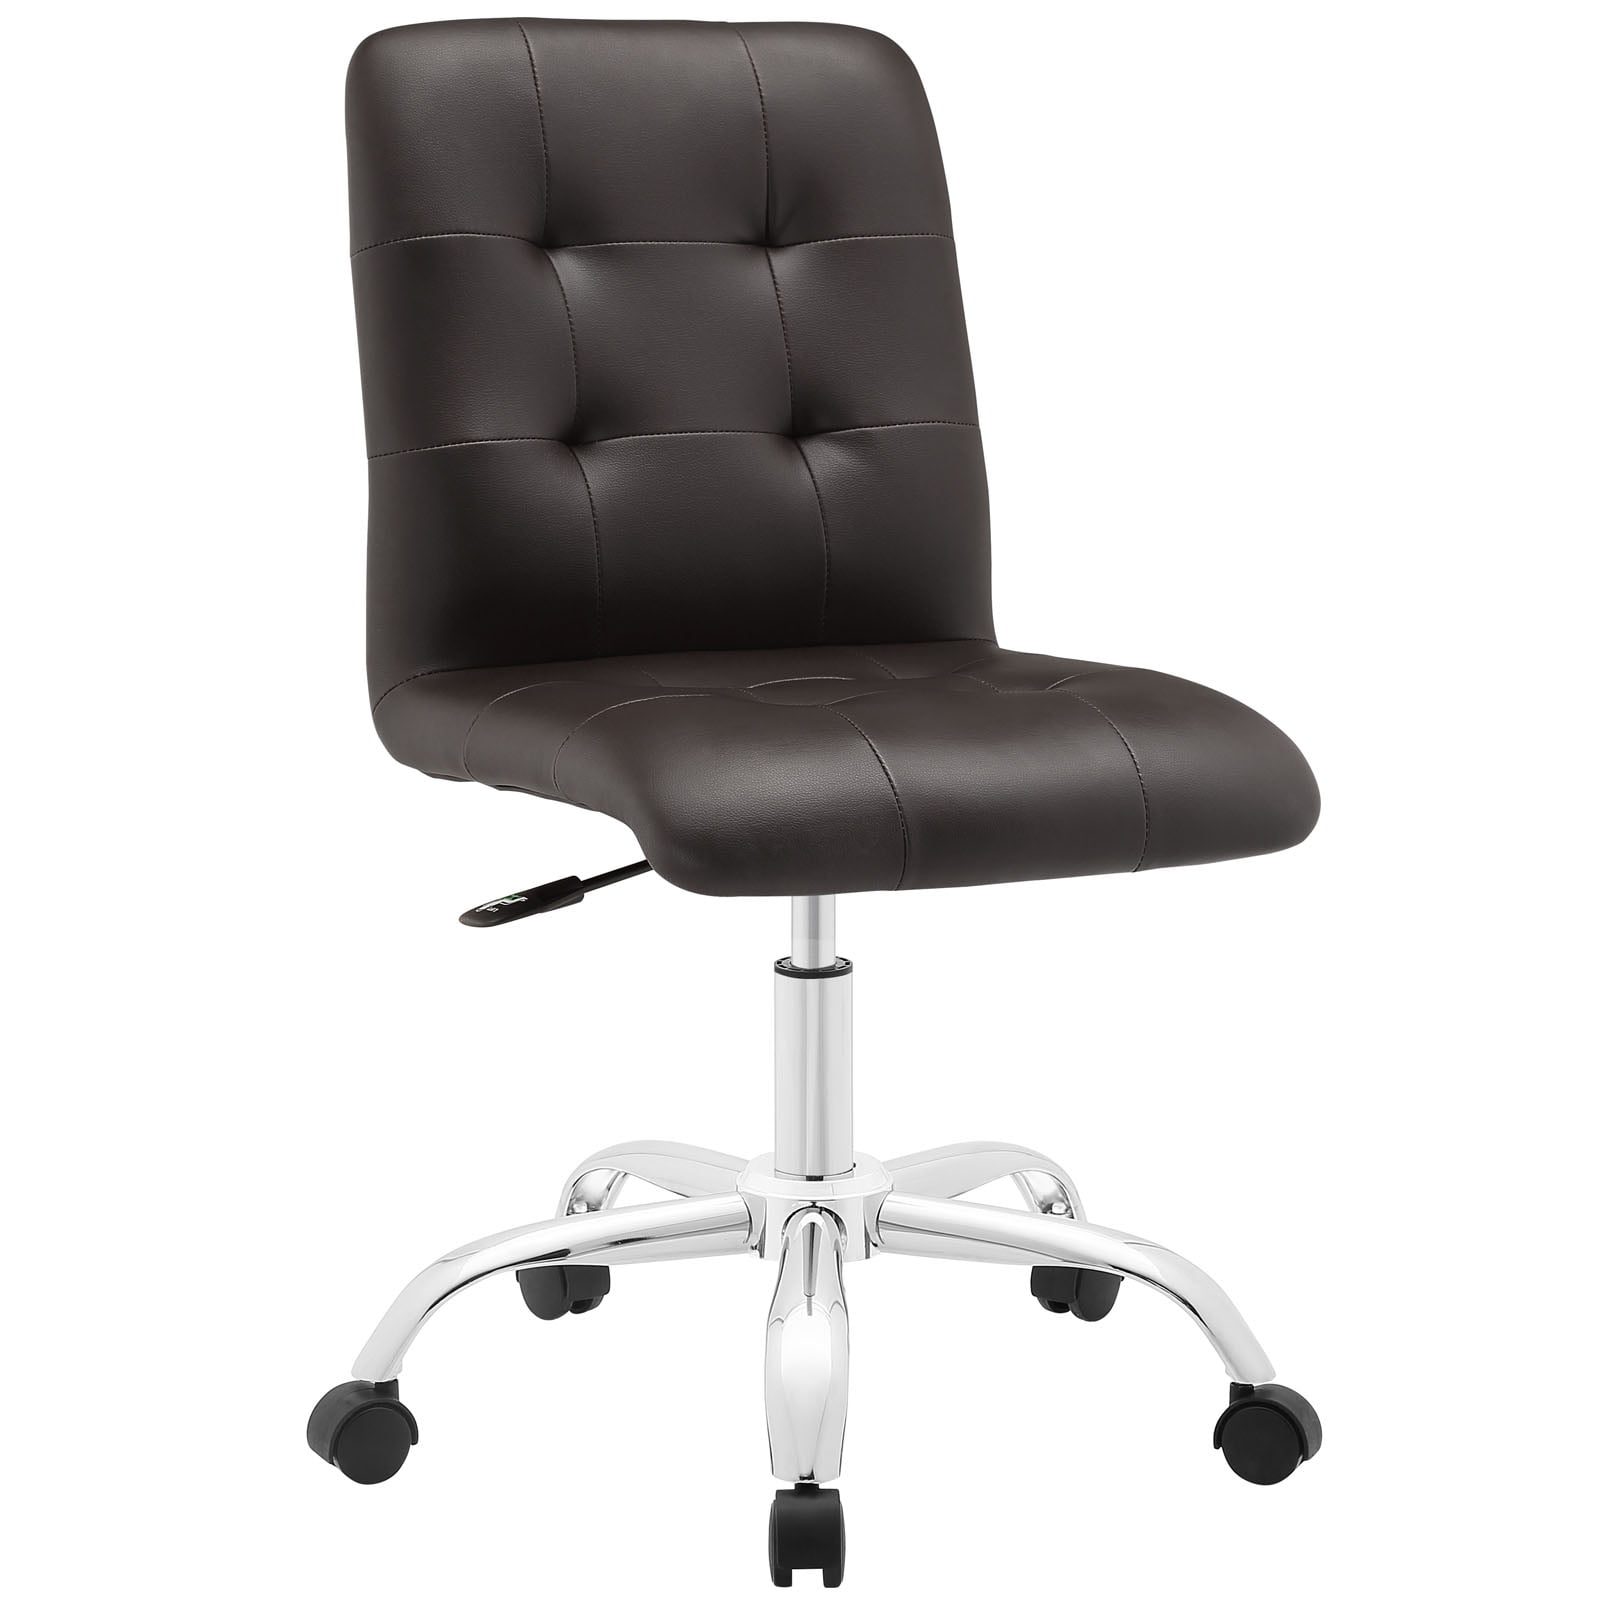 Modern Contemporary Office Chair, Brown Faux Leather - Walmart.com